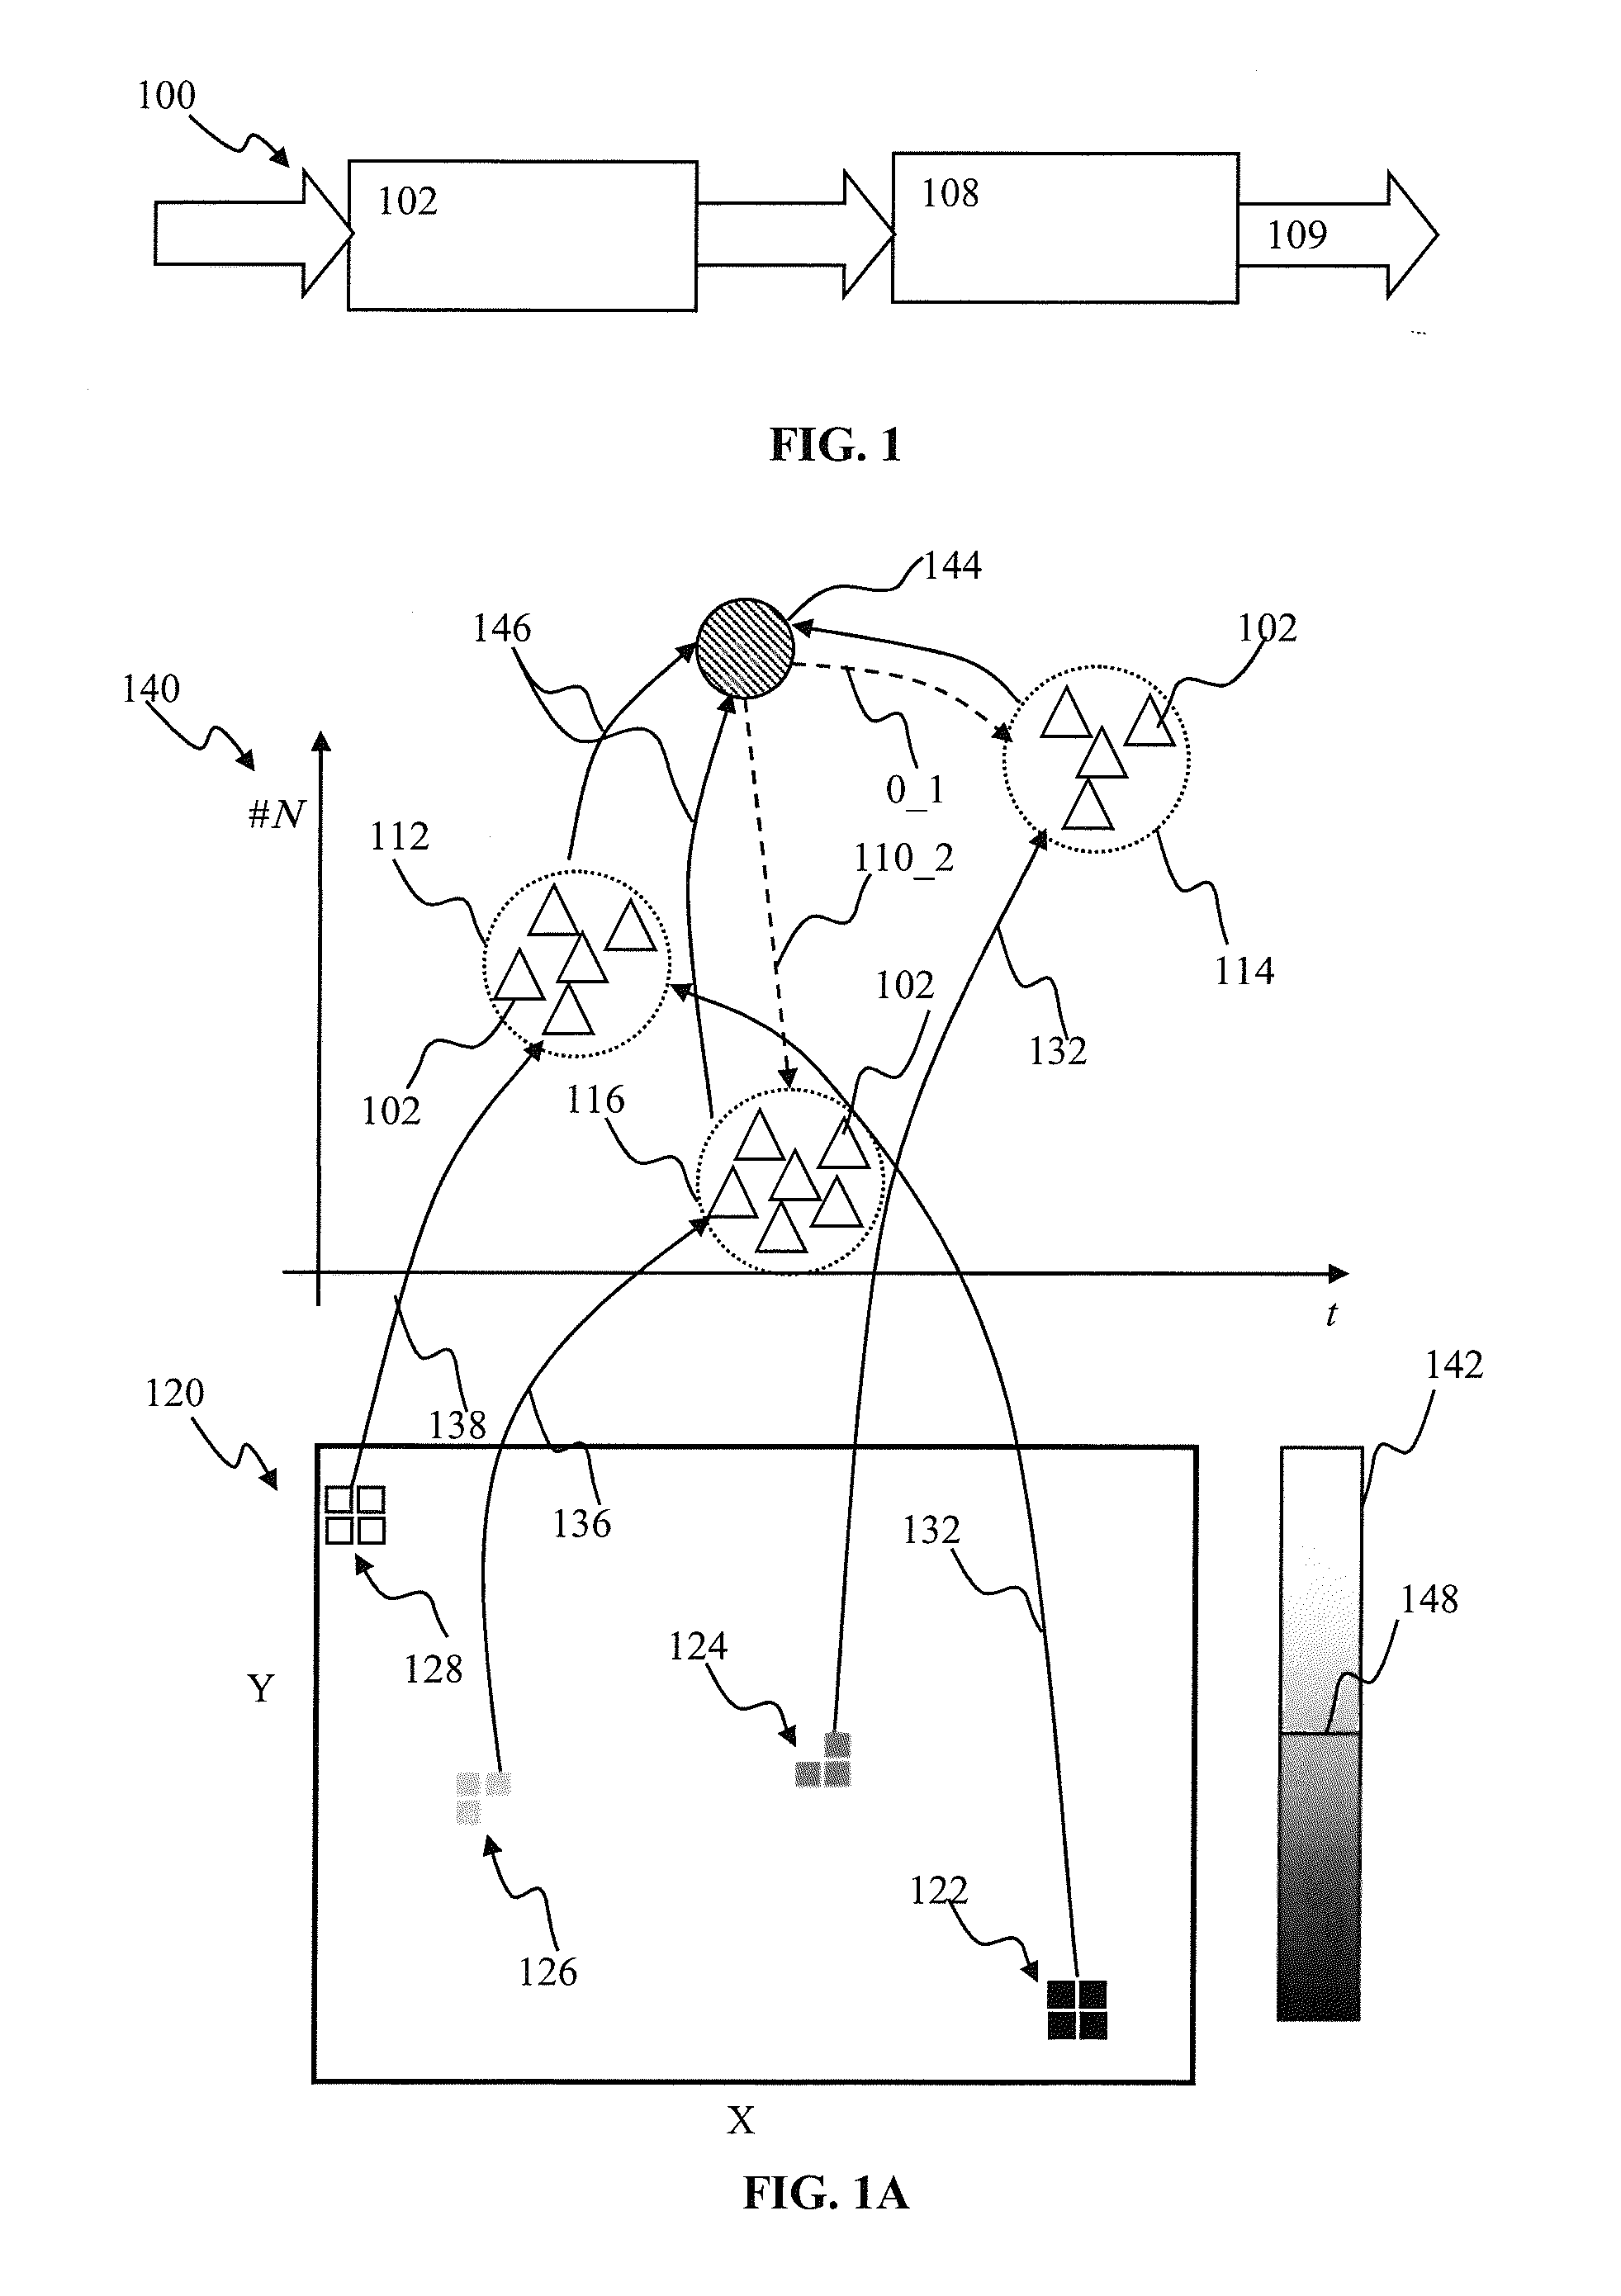 Spiking neuron network sensory processing apparatus and methods